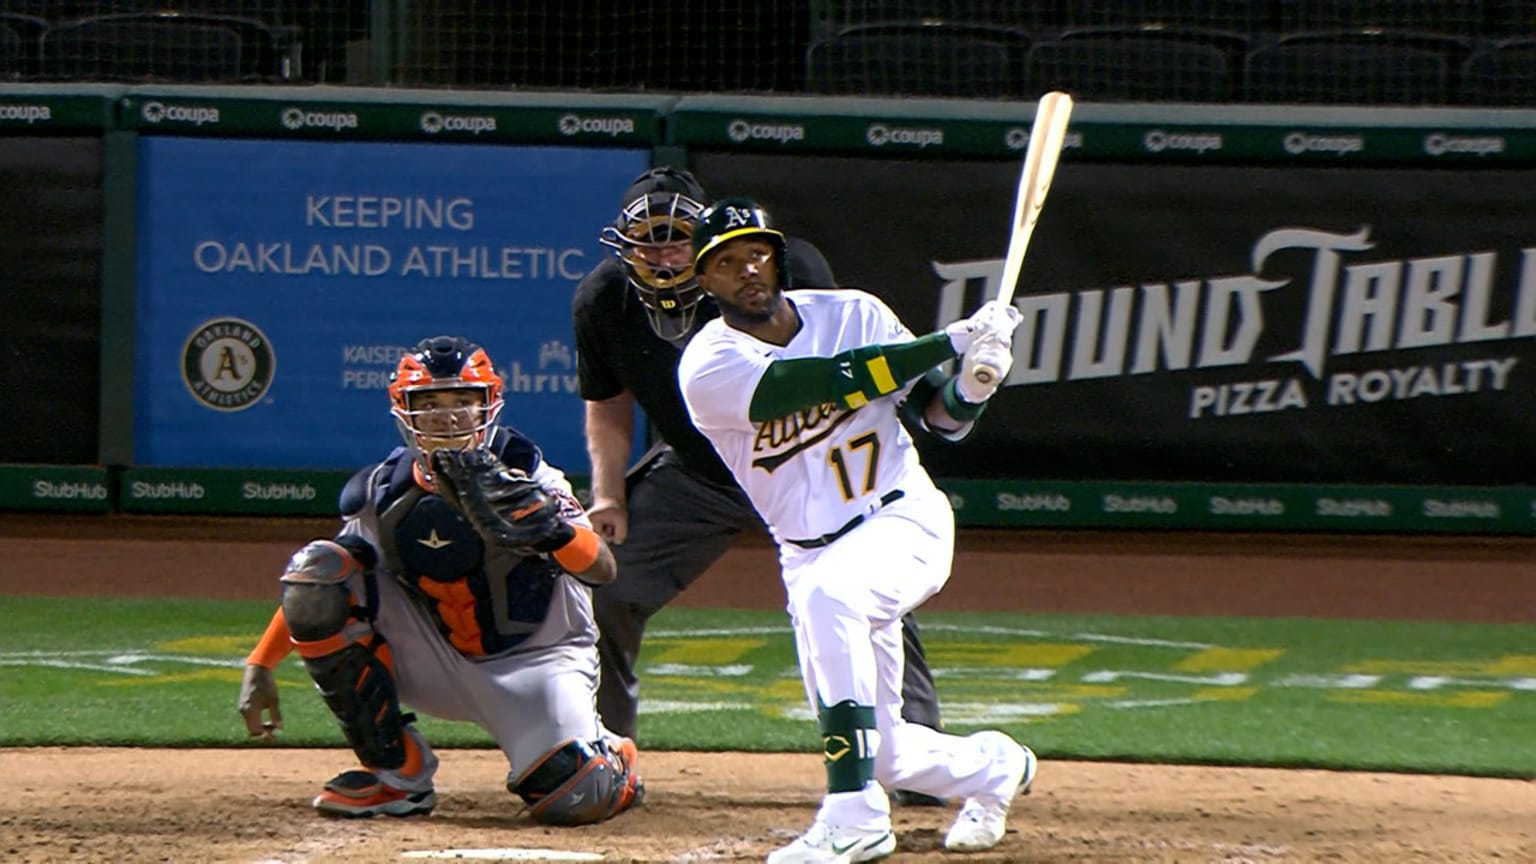 Elvis Andrus doubles in A's debut, 04/01/2021